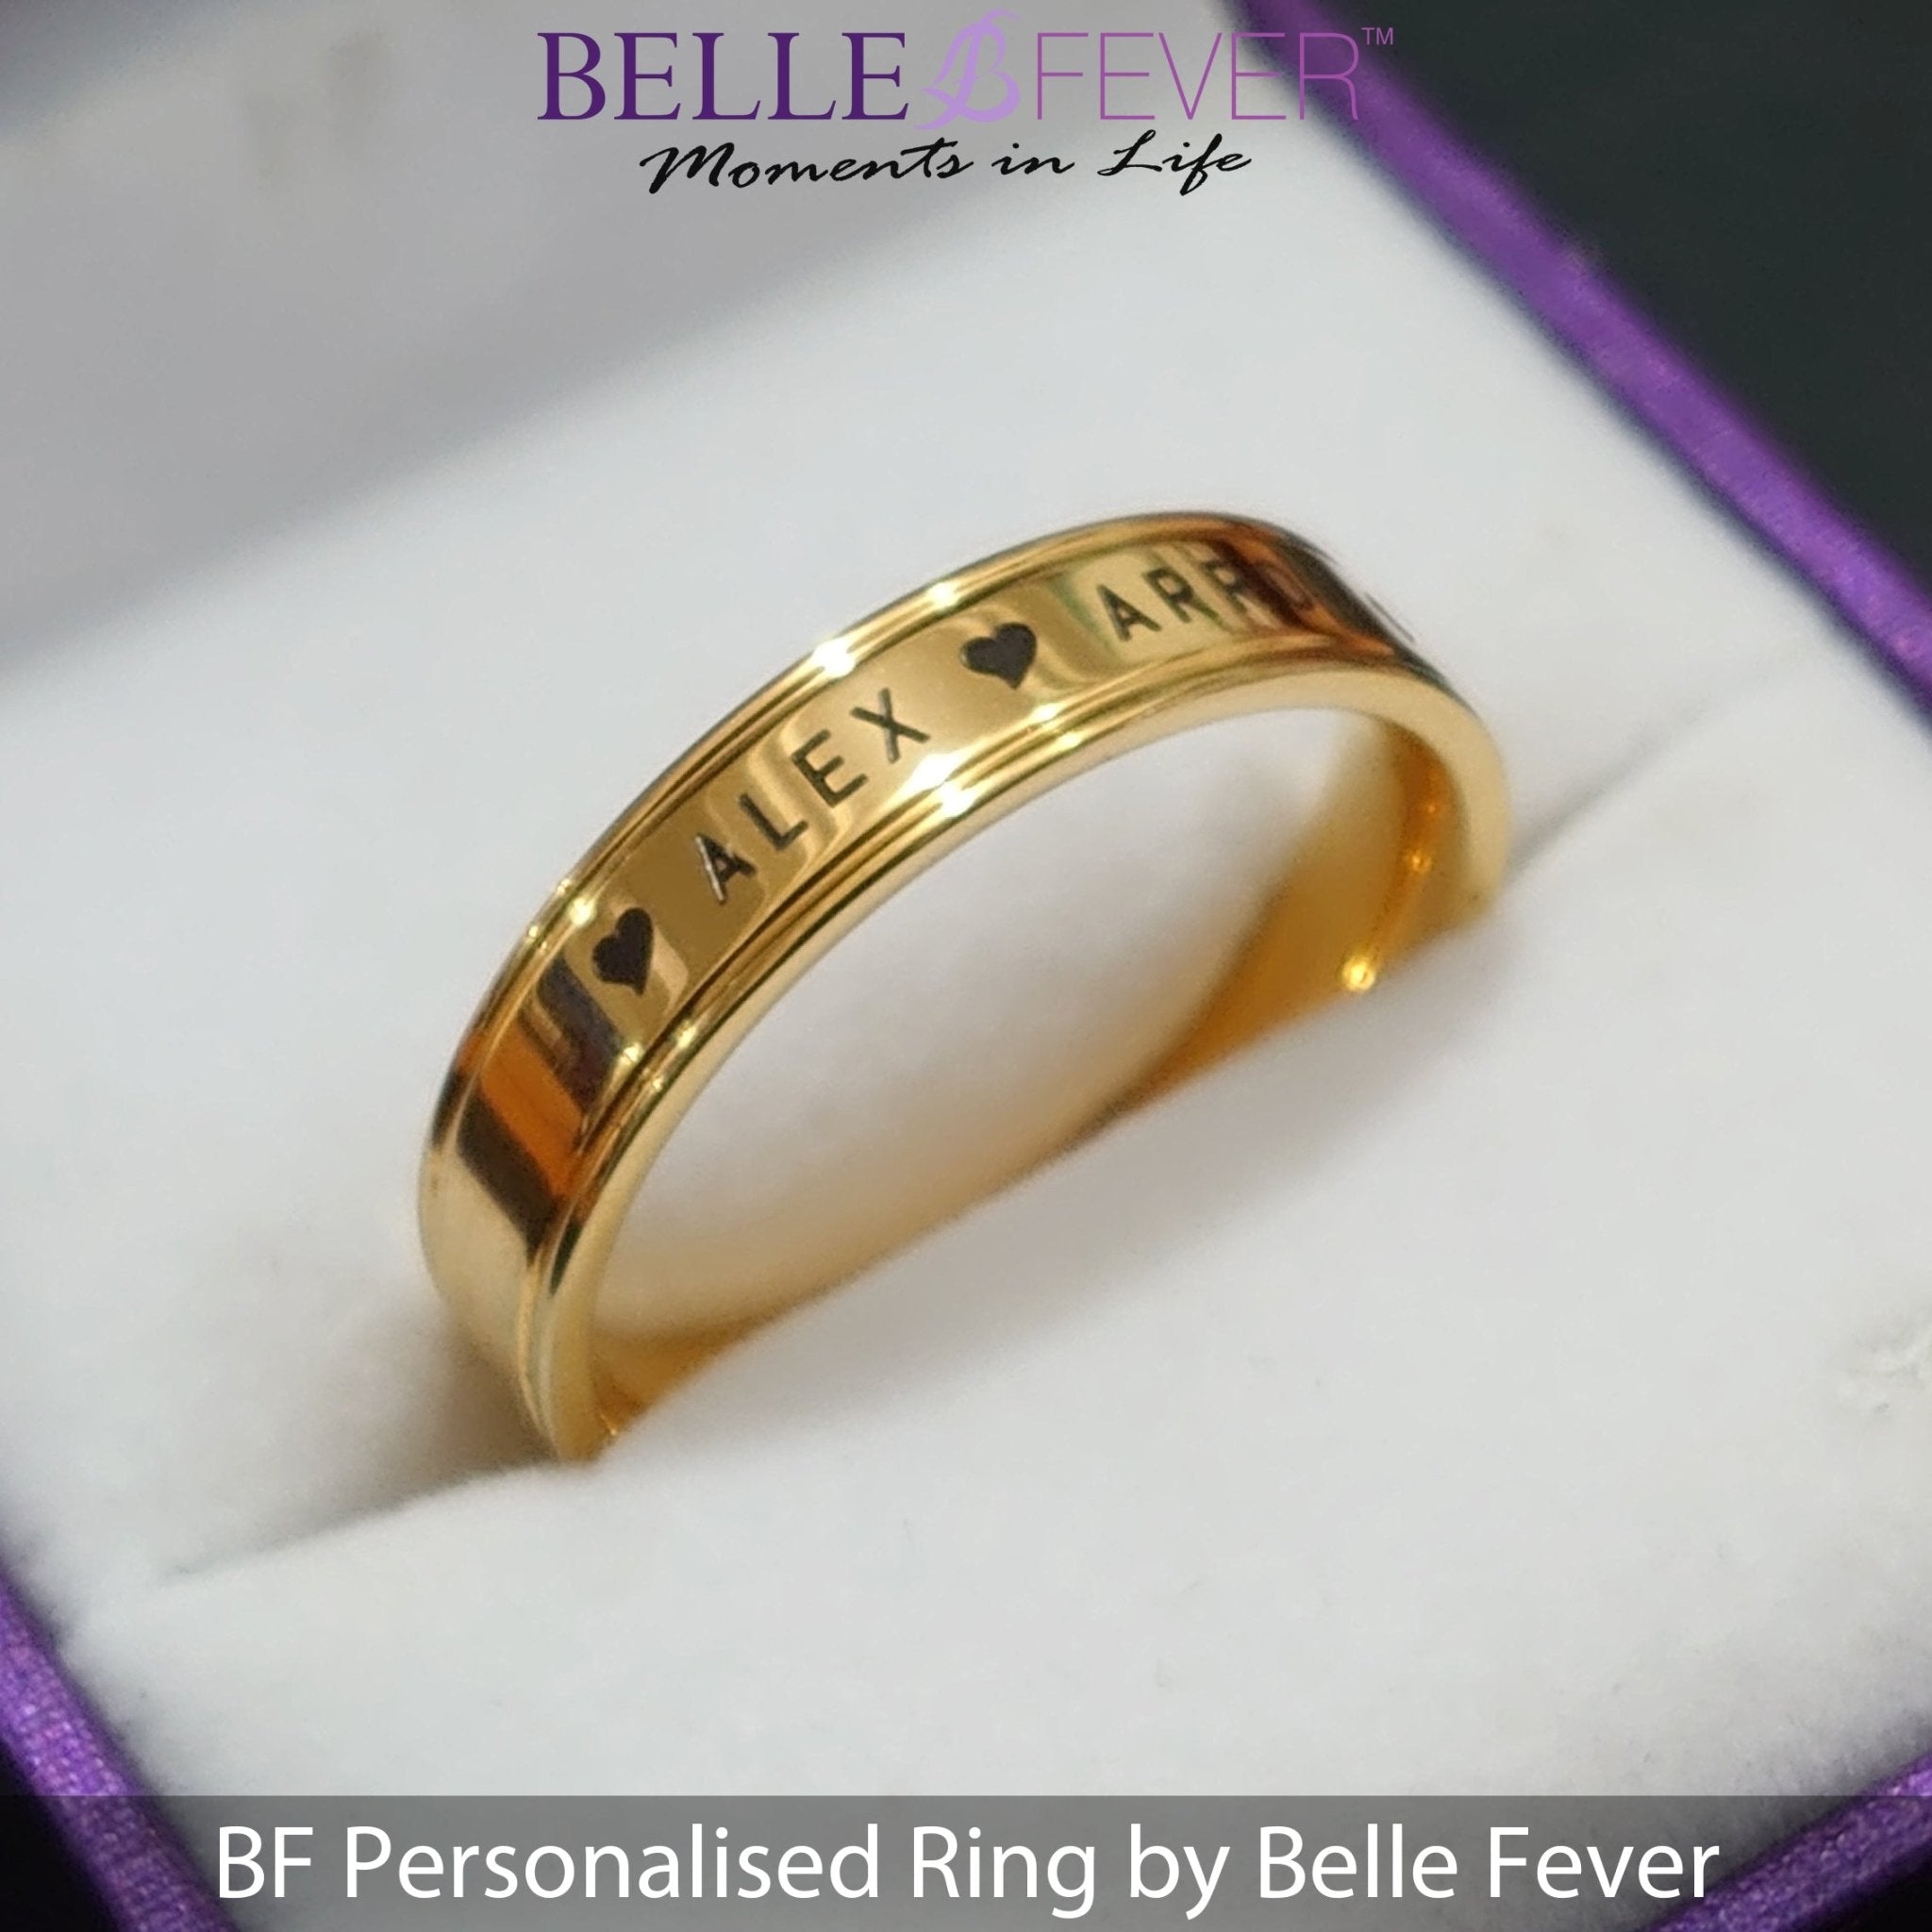 💕 A personalised ring design that will steal your heart 💕 - BELLE FEVER